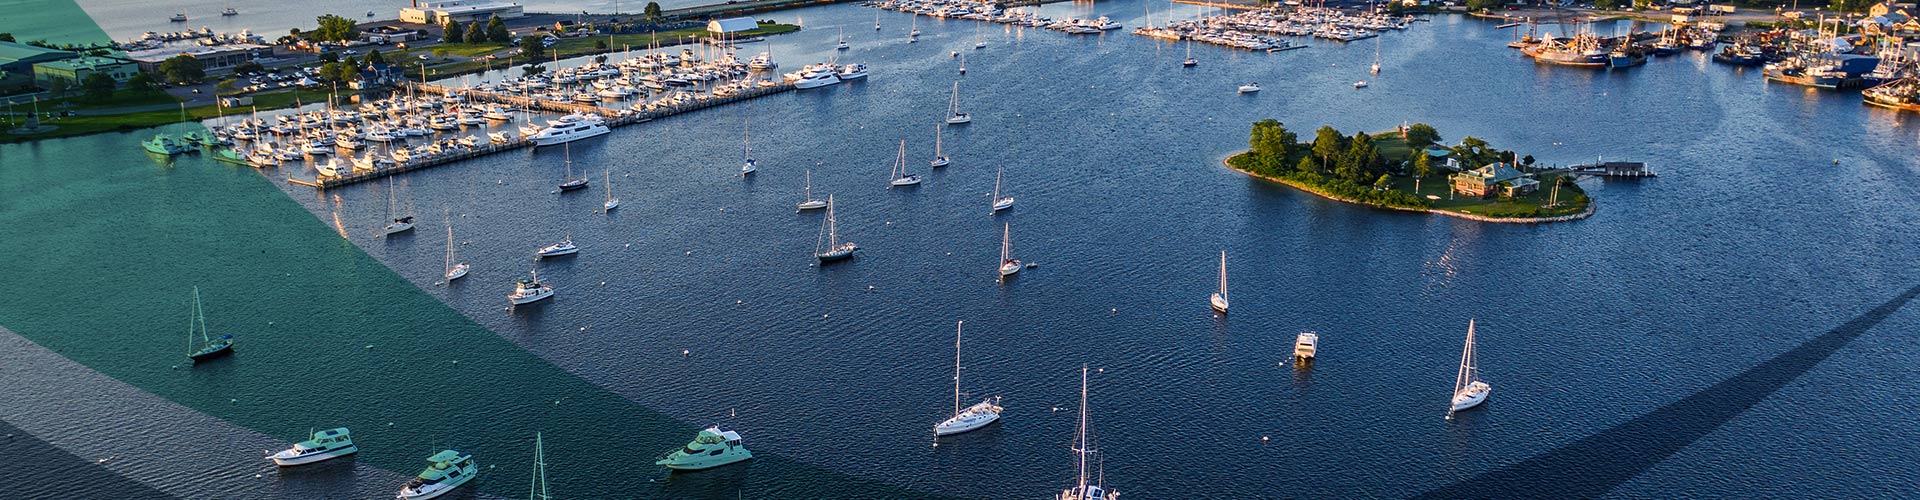 aerial-picture-of-several-boats-on-massachussets-dartmouth-ma